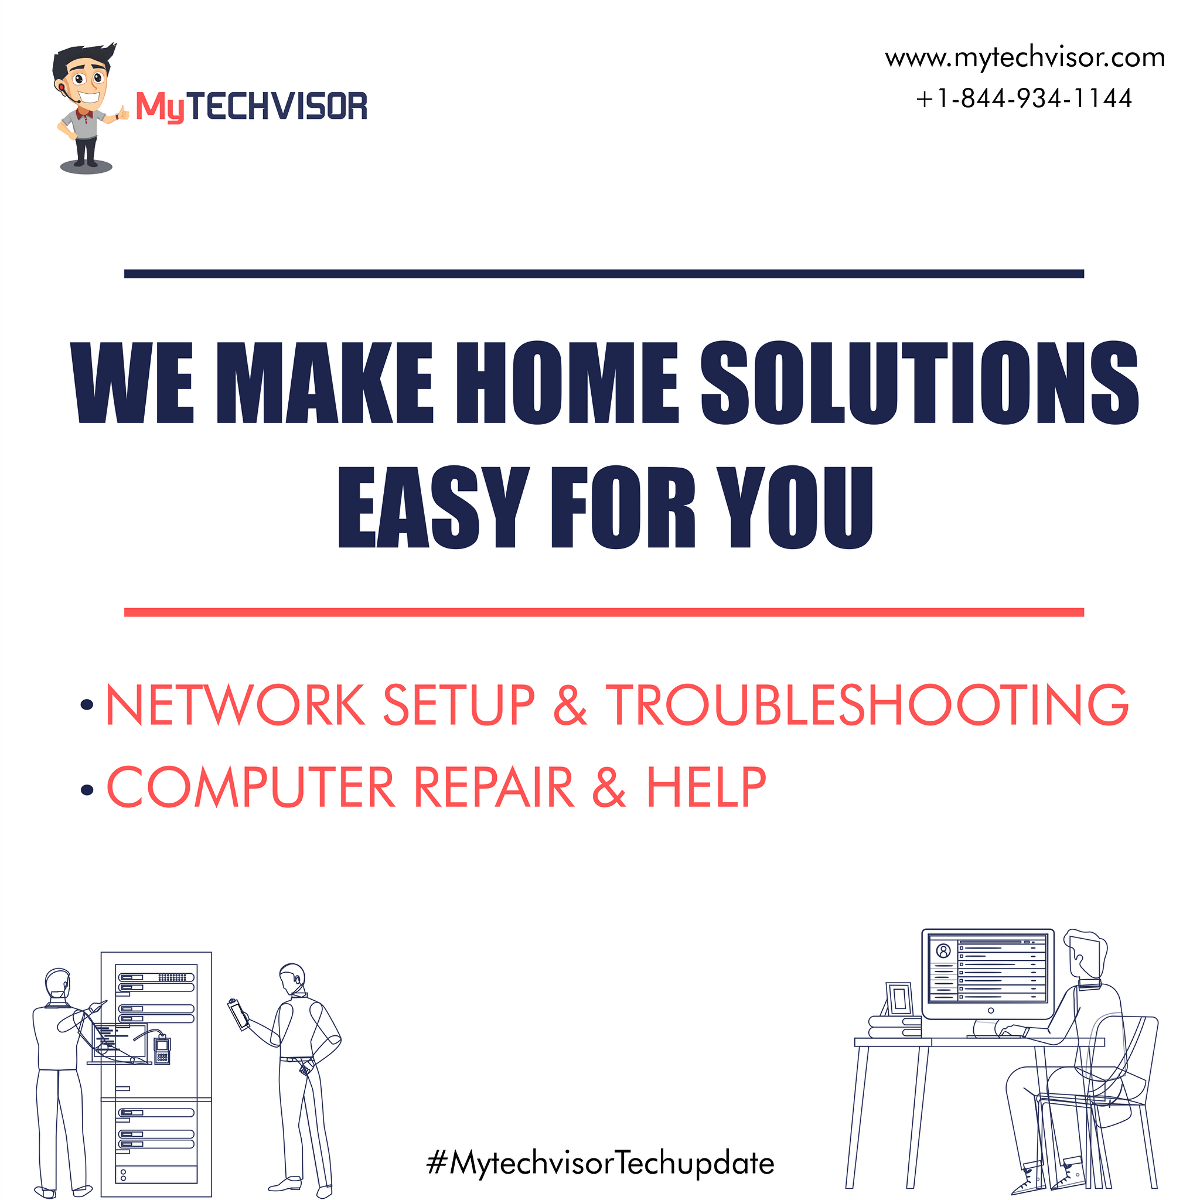 onsite and remote computer repair services